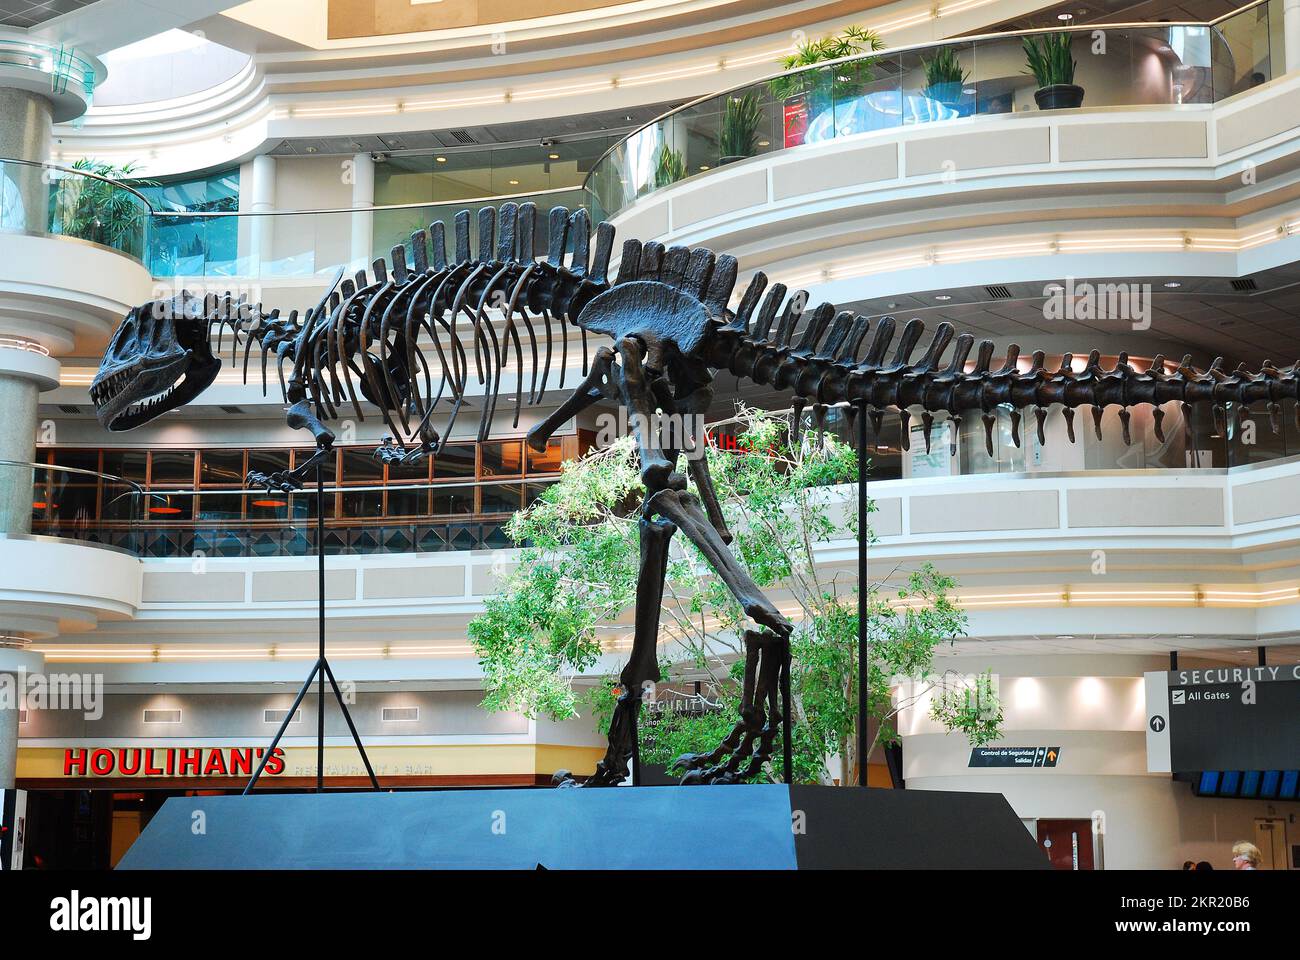 A skeleton of a T Rex dinosaur stands in the atrium of the Atlanta International Airport Stock Photo